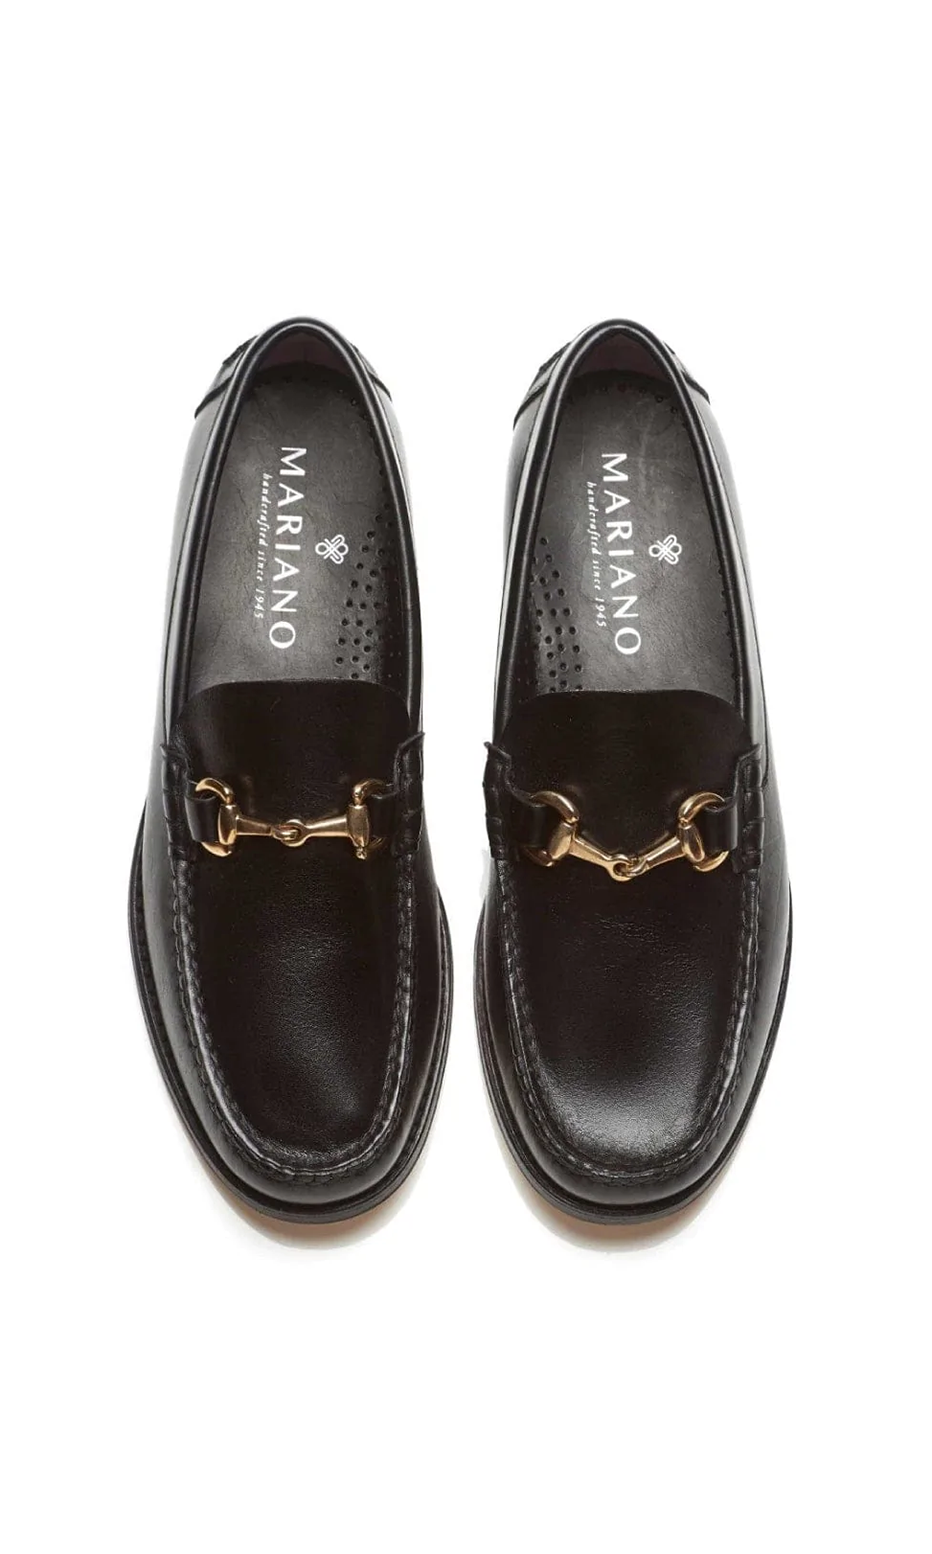 classic loafers mariano